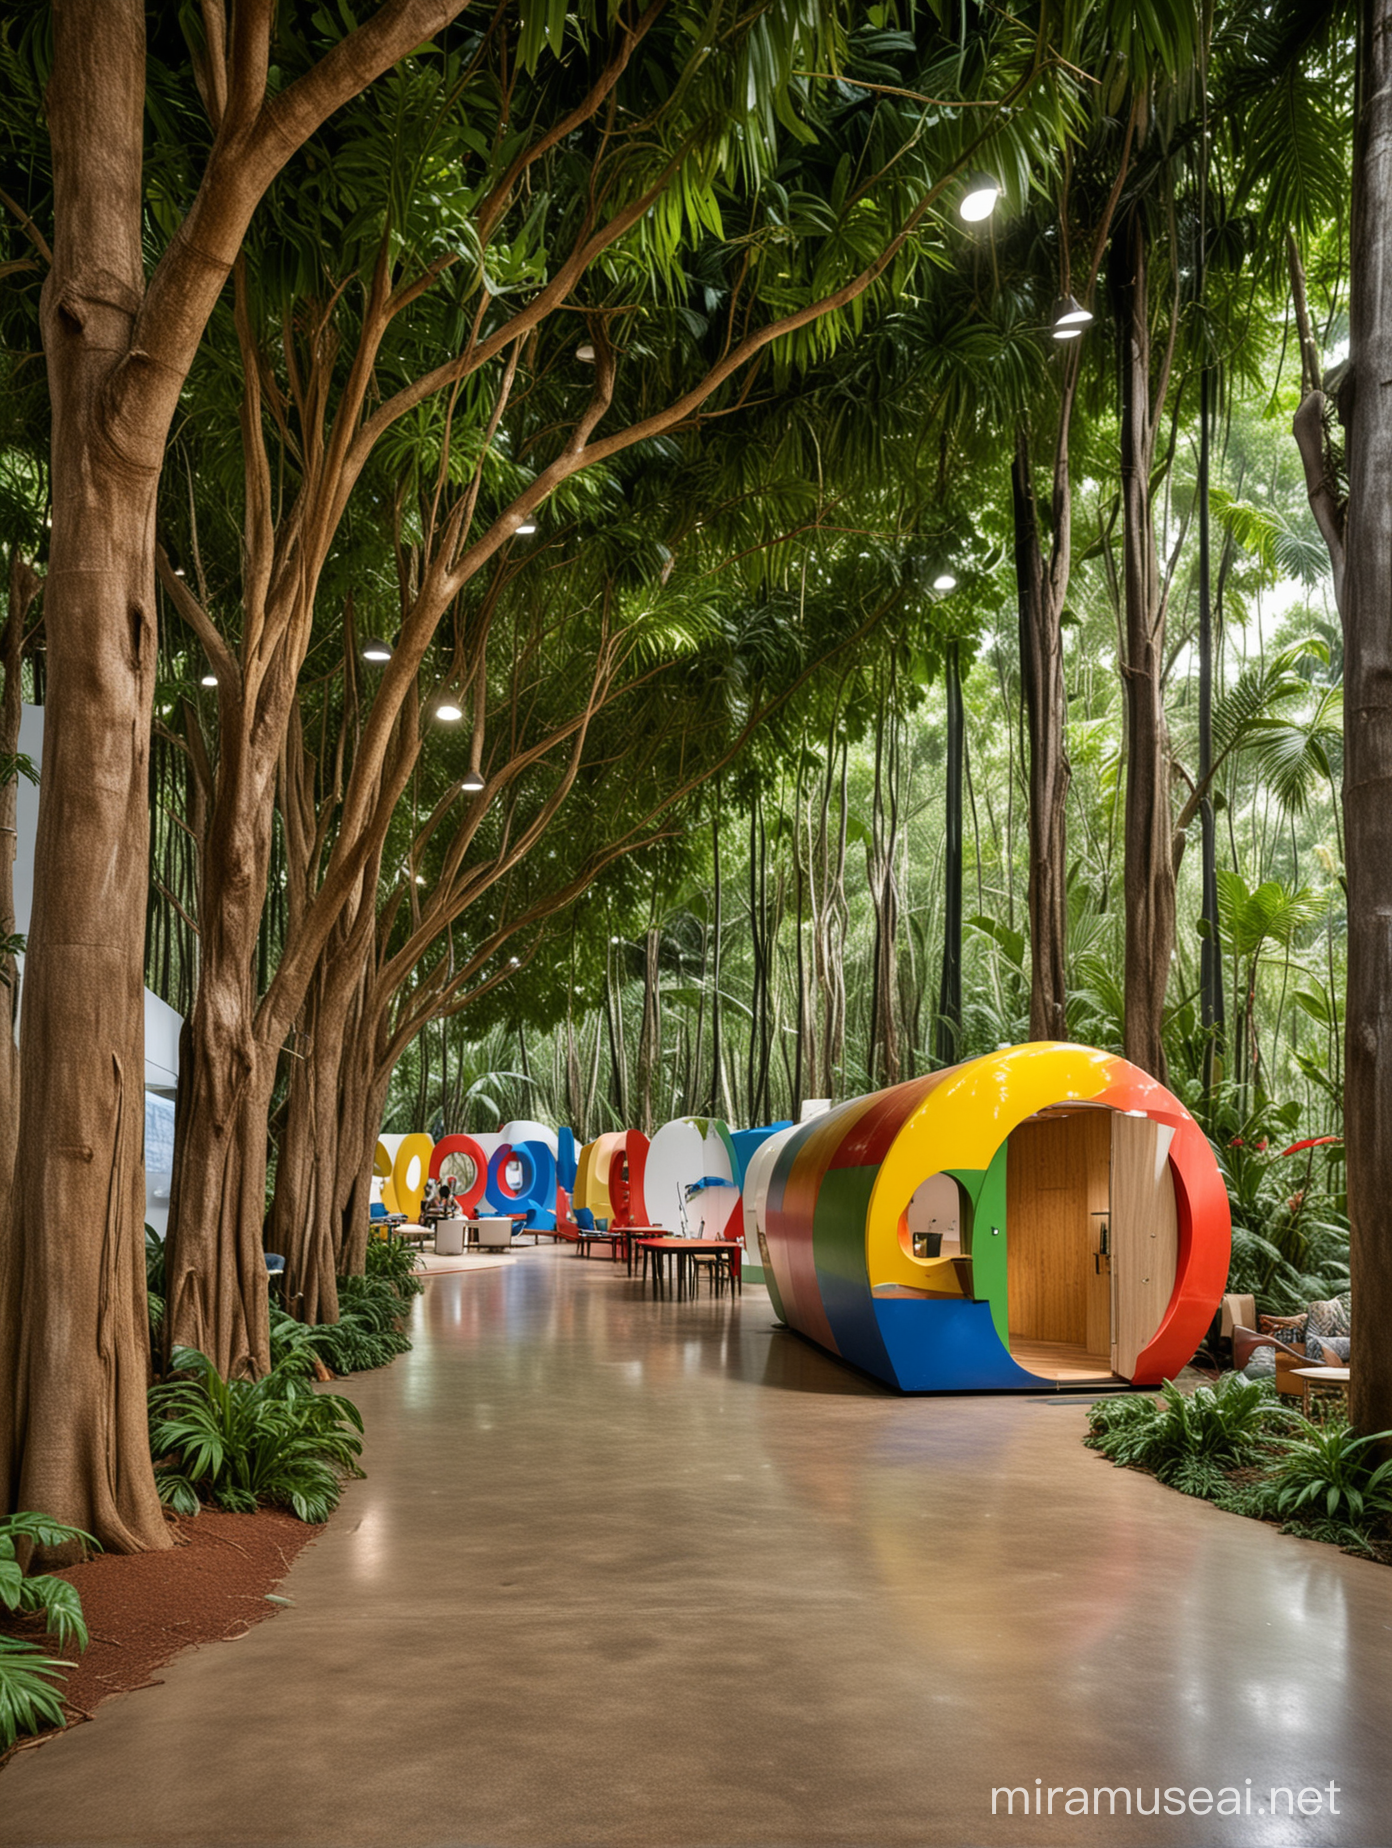 'Google Office Showroom' in the Amazon forest of Brazil, funny interior architecture, colorful